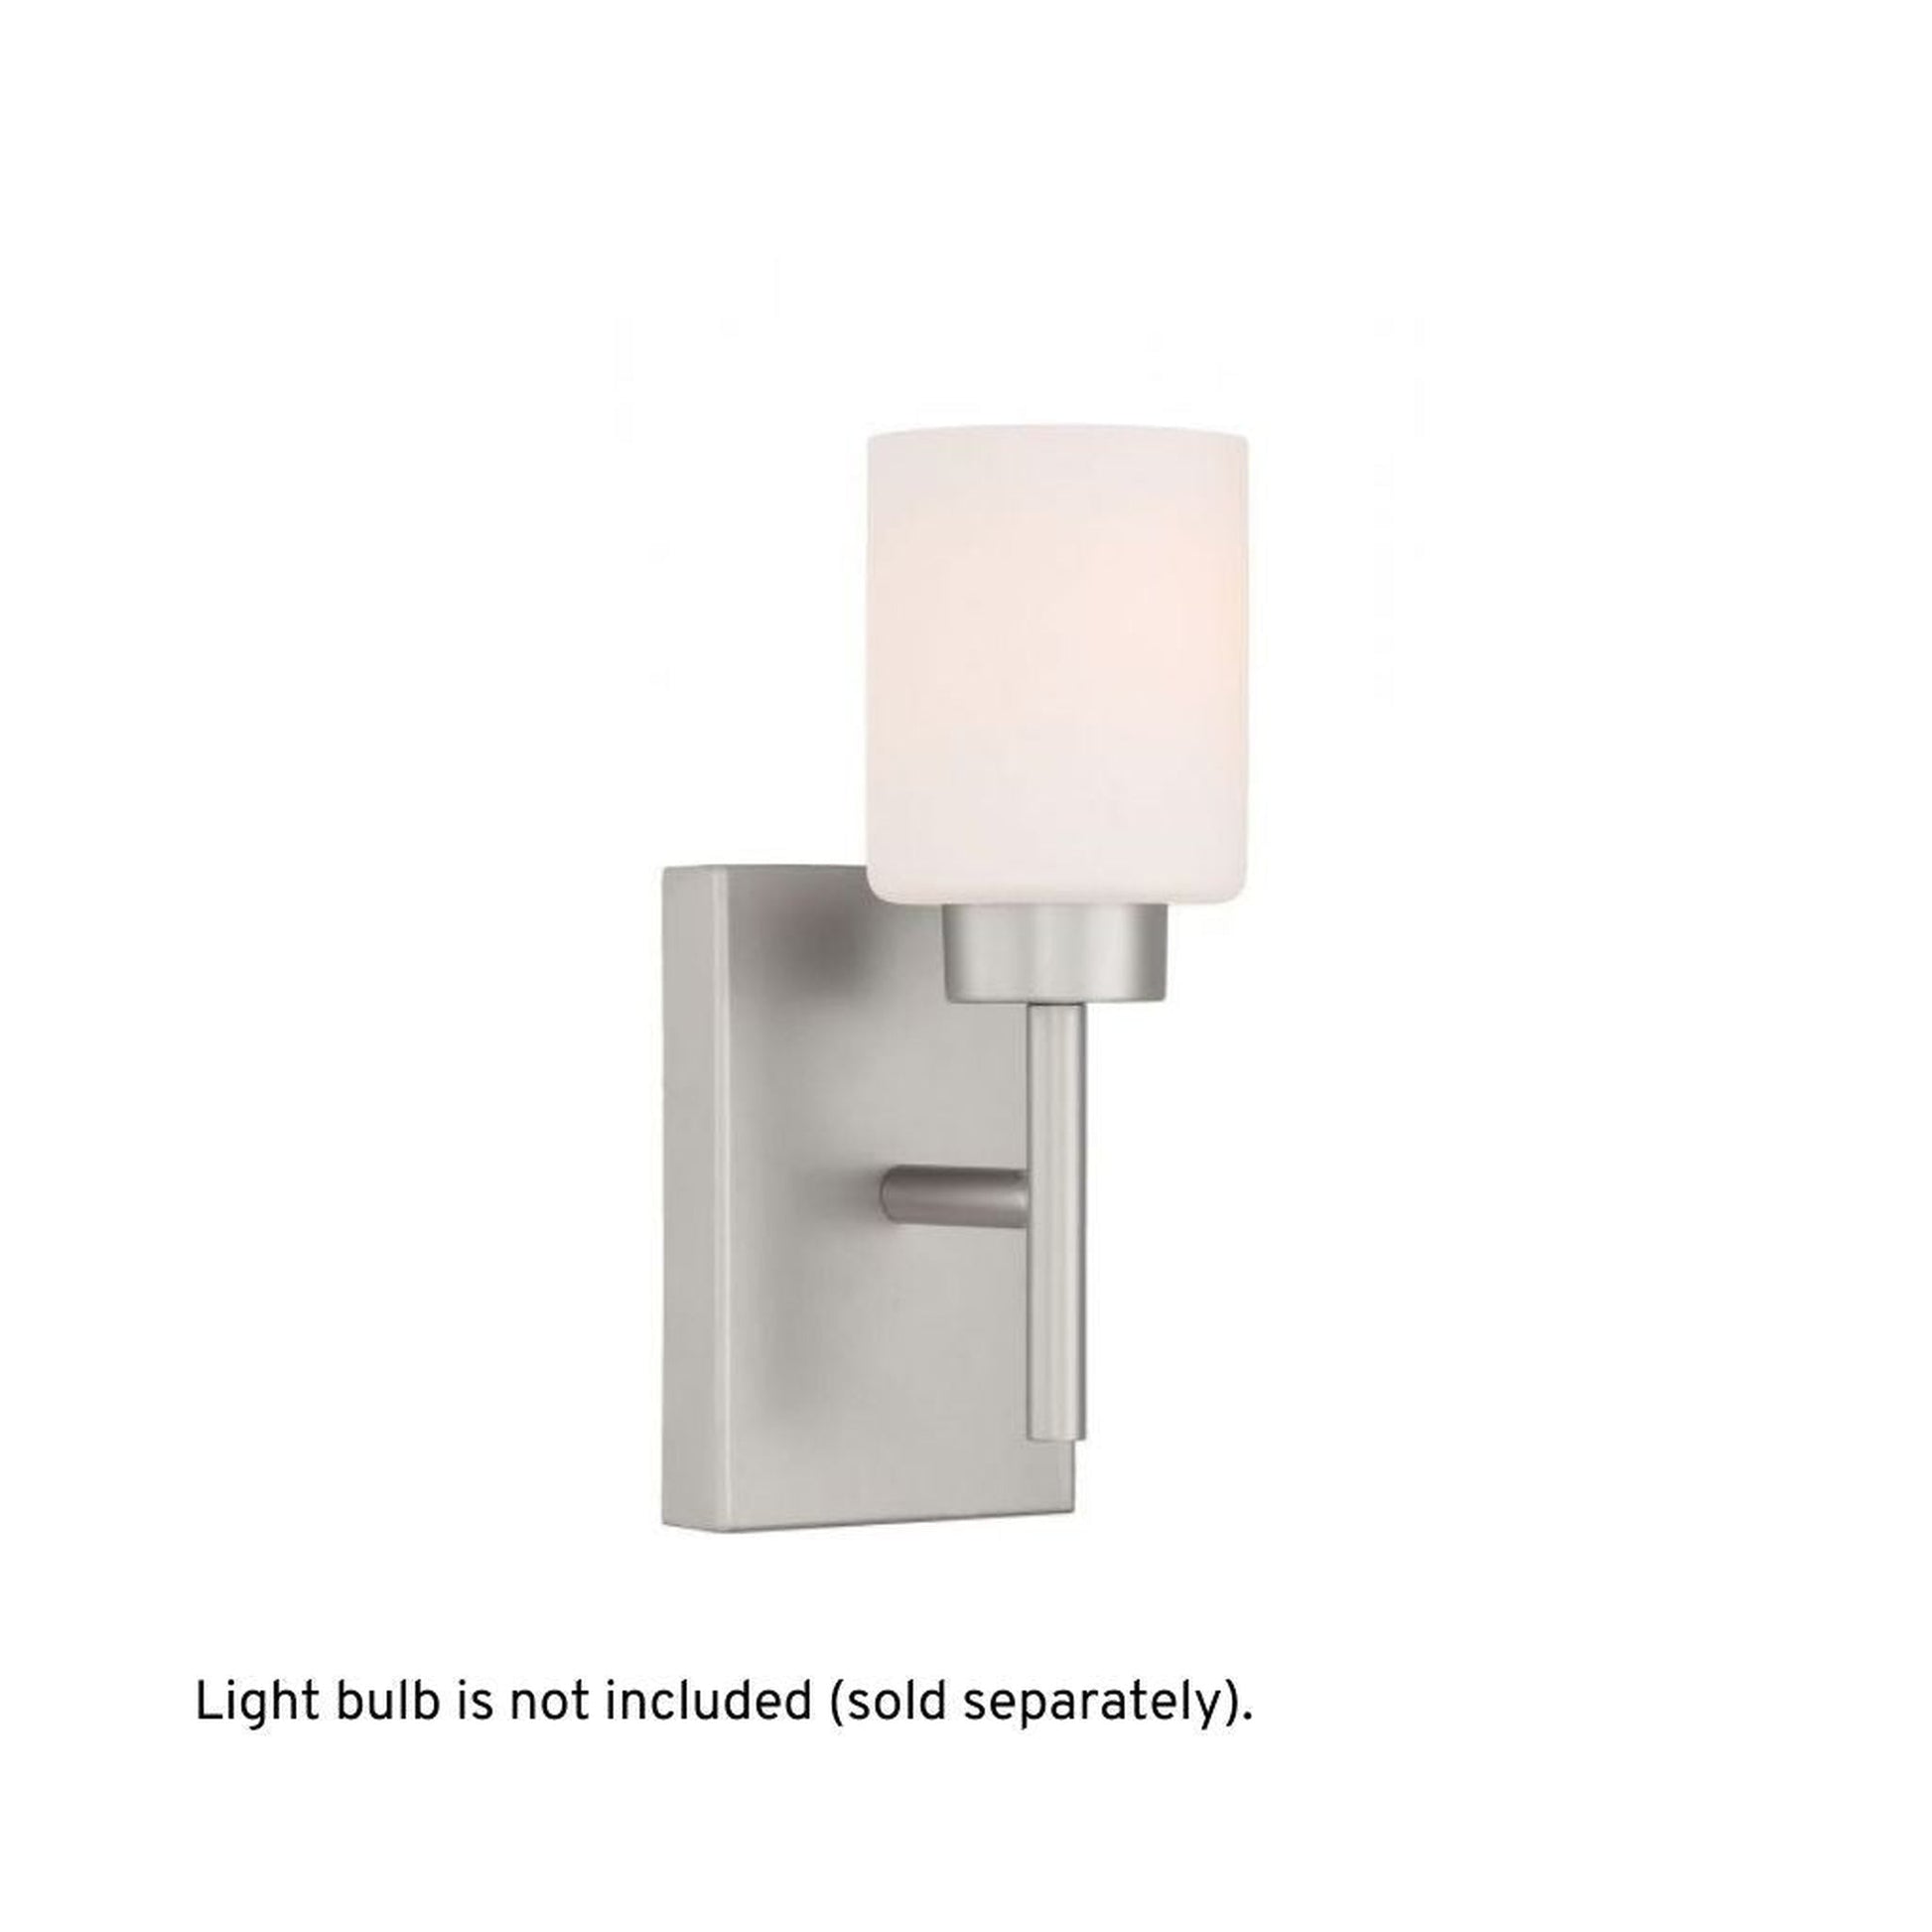 Craftmade Cadence 5" x 11" 1-Light Satin Nickel Wall Sconce With White Frosted Glass Shade